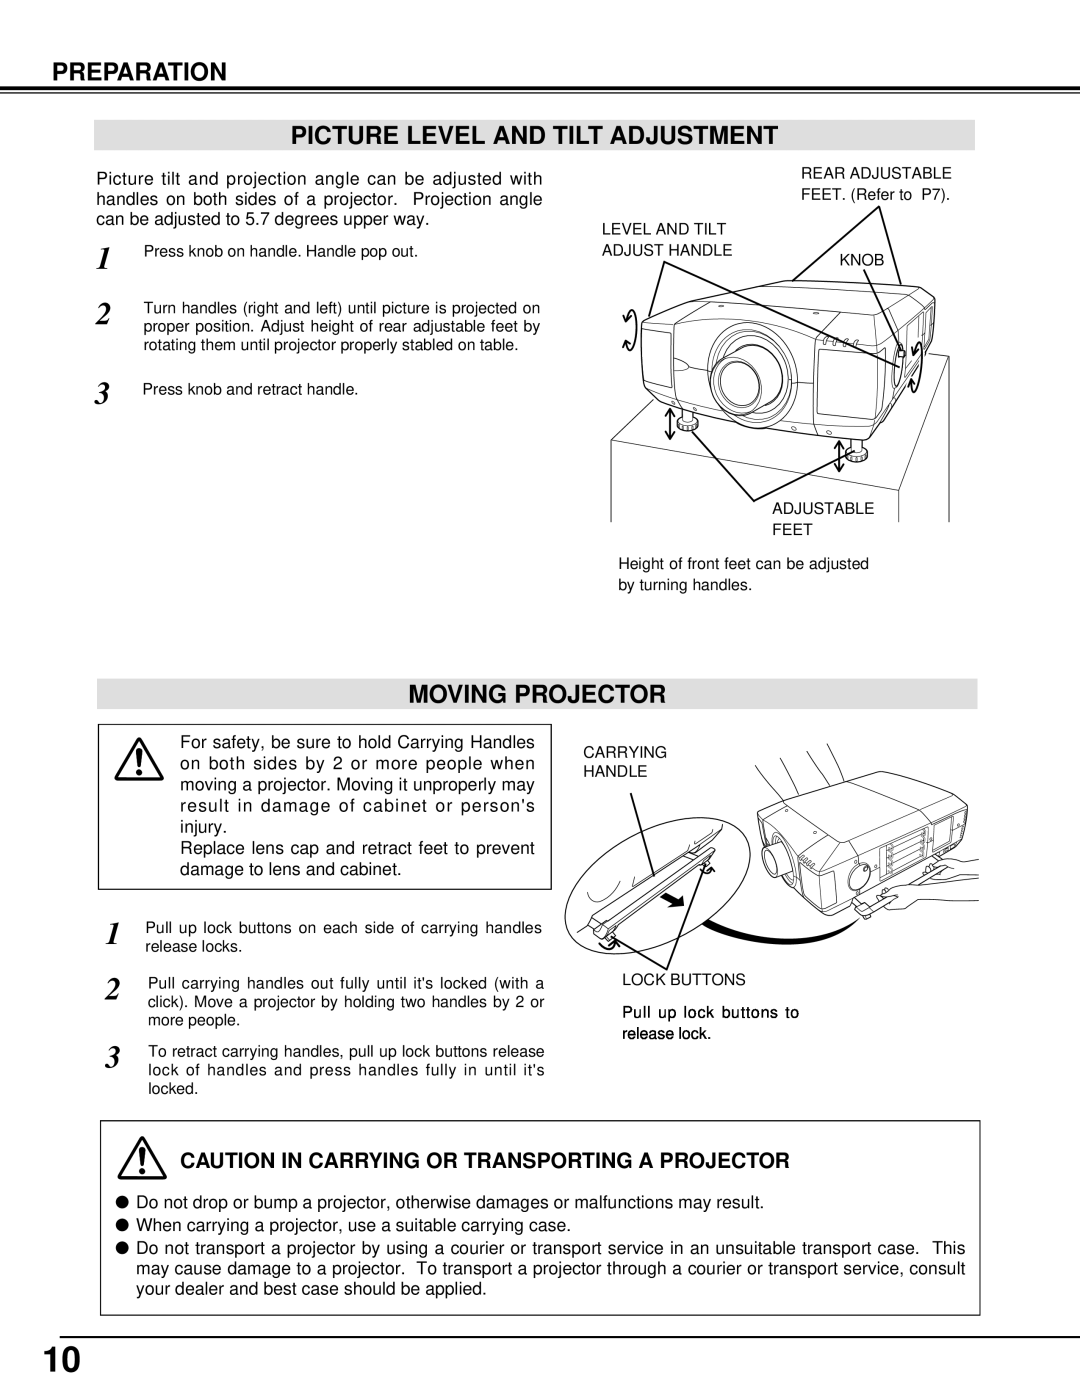 Eiki LC-XT2 instruction manual Preparation Picture Level And Tilt Adjustment, Moving Projector 